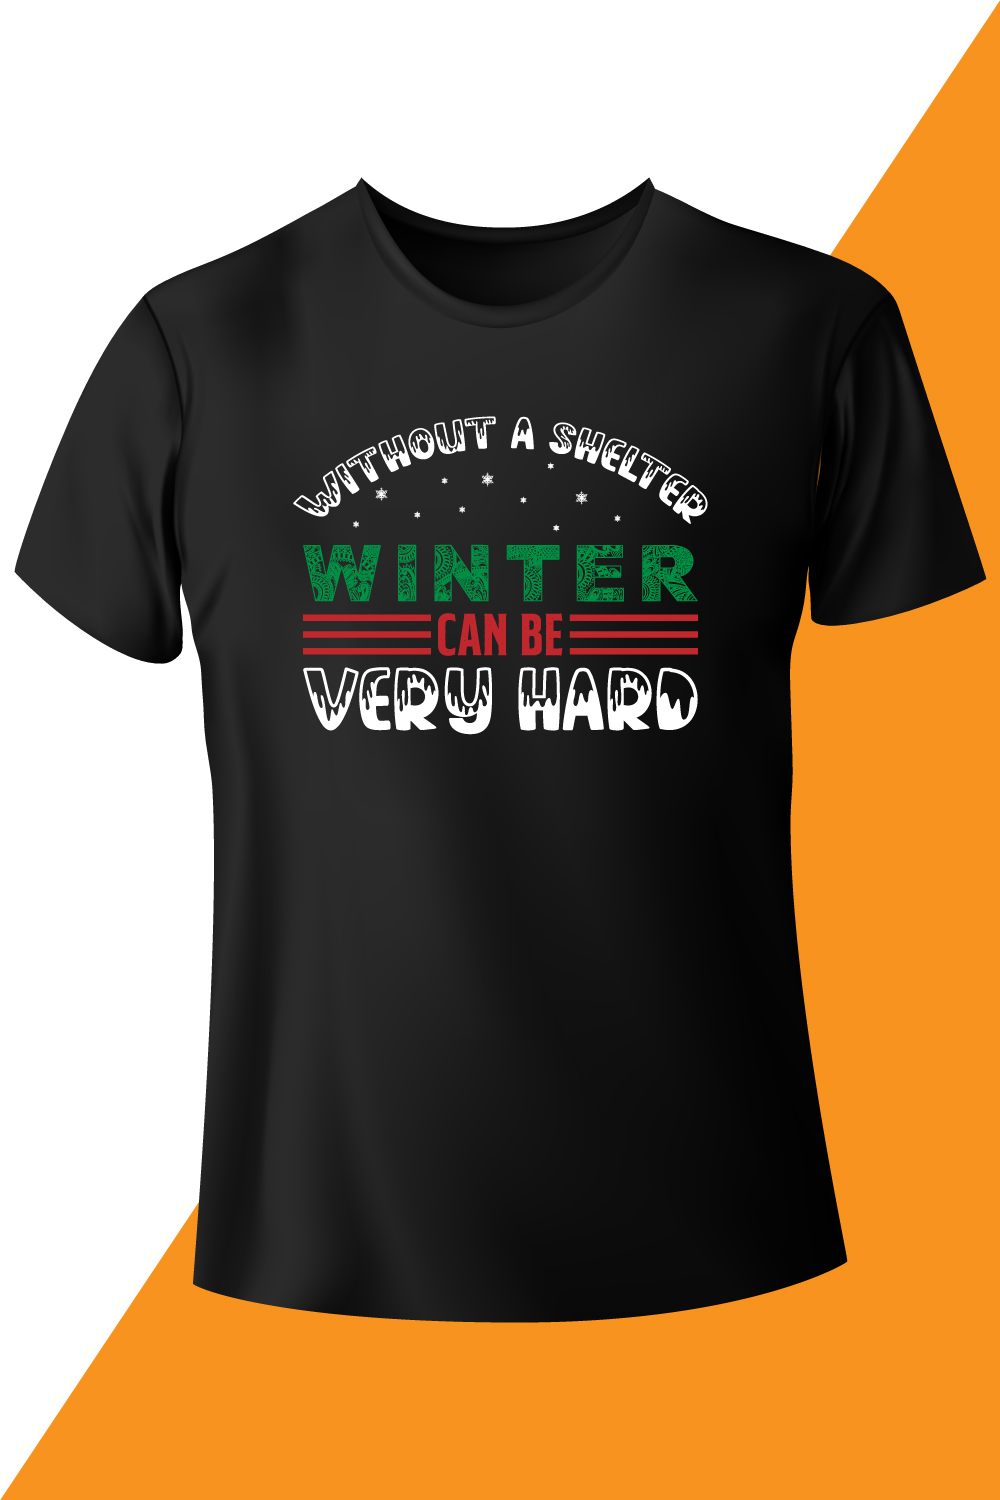 Image of a black t-shirt with a unique inscription winter can be very hard.